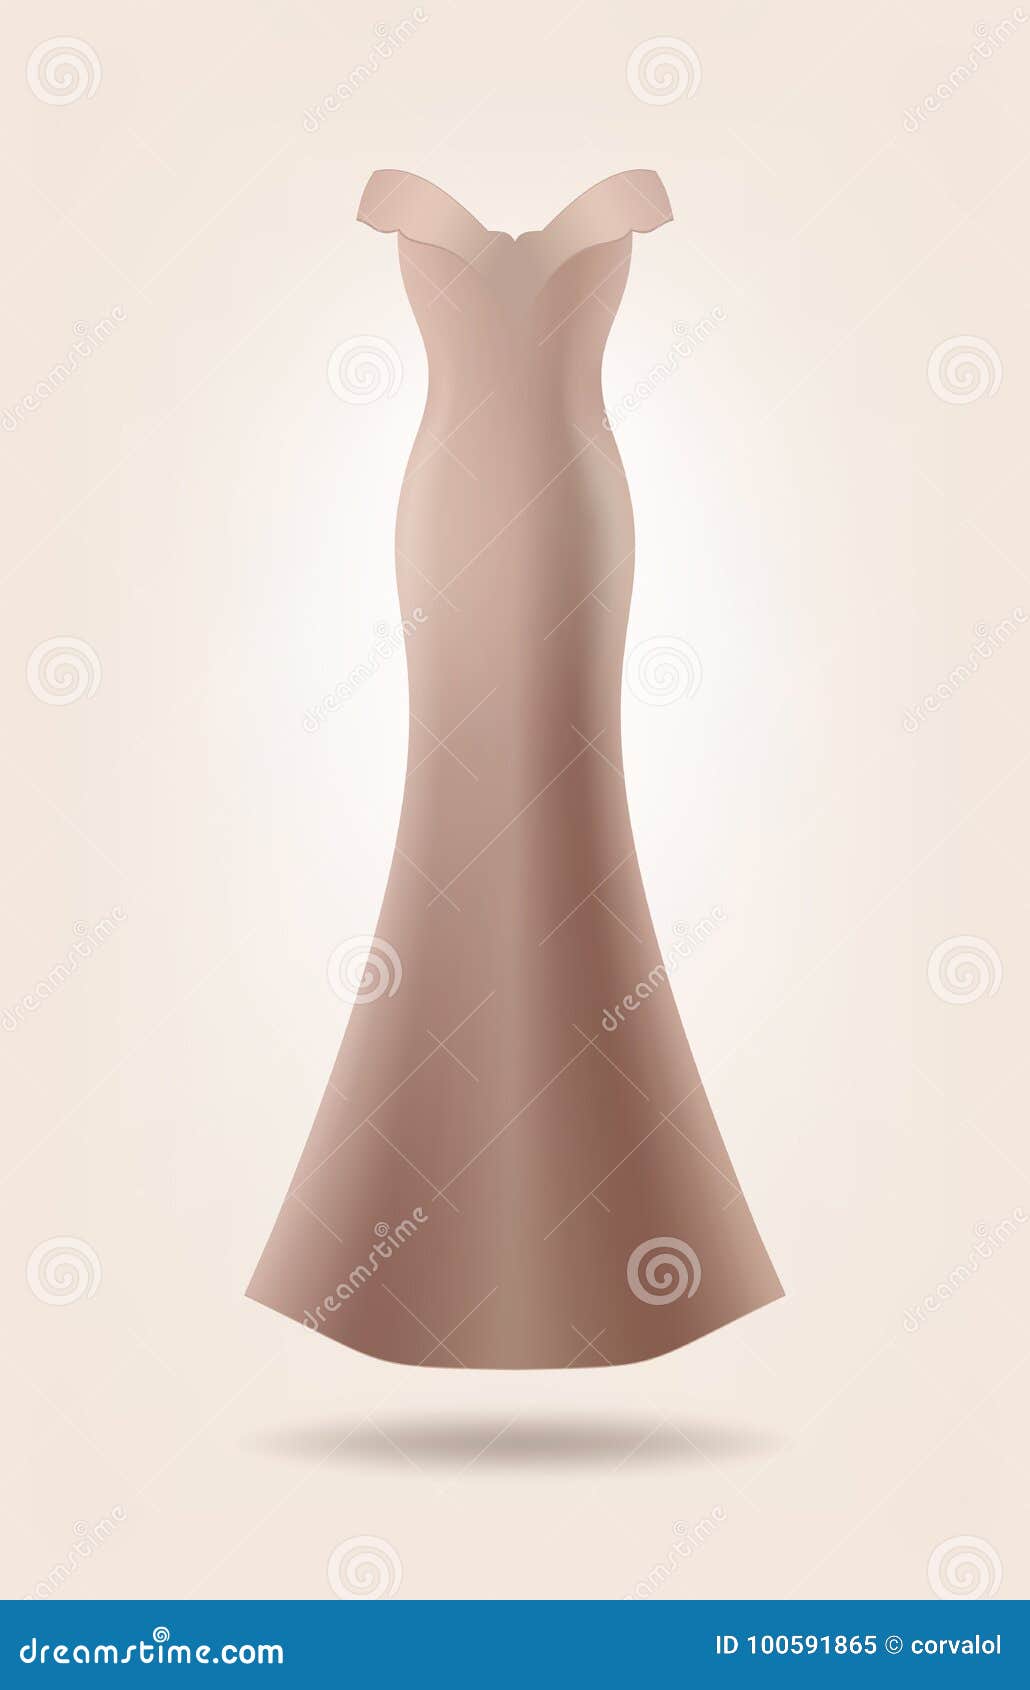 Download Female Long Dress Mock Up. Isolated Beige Dress Stock ...